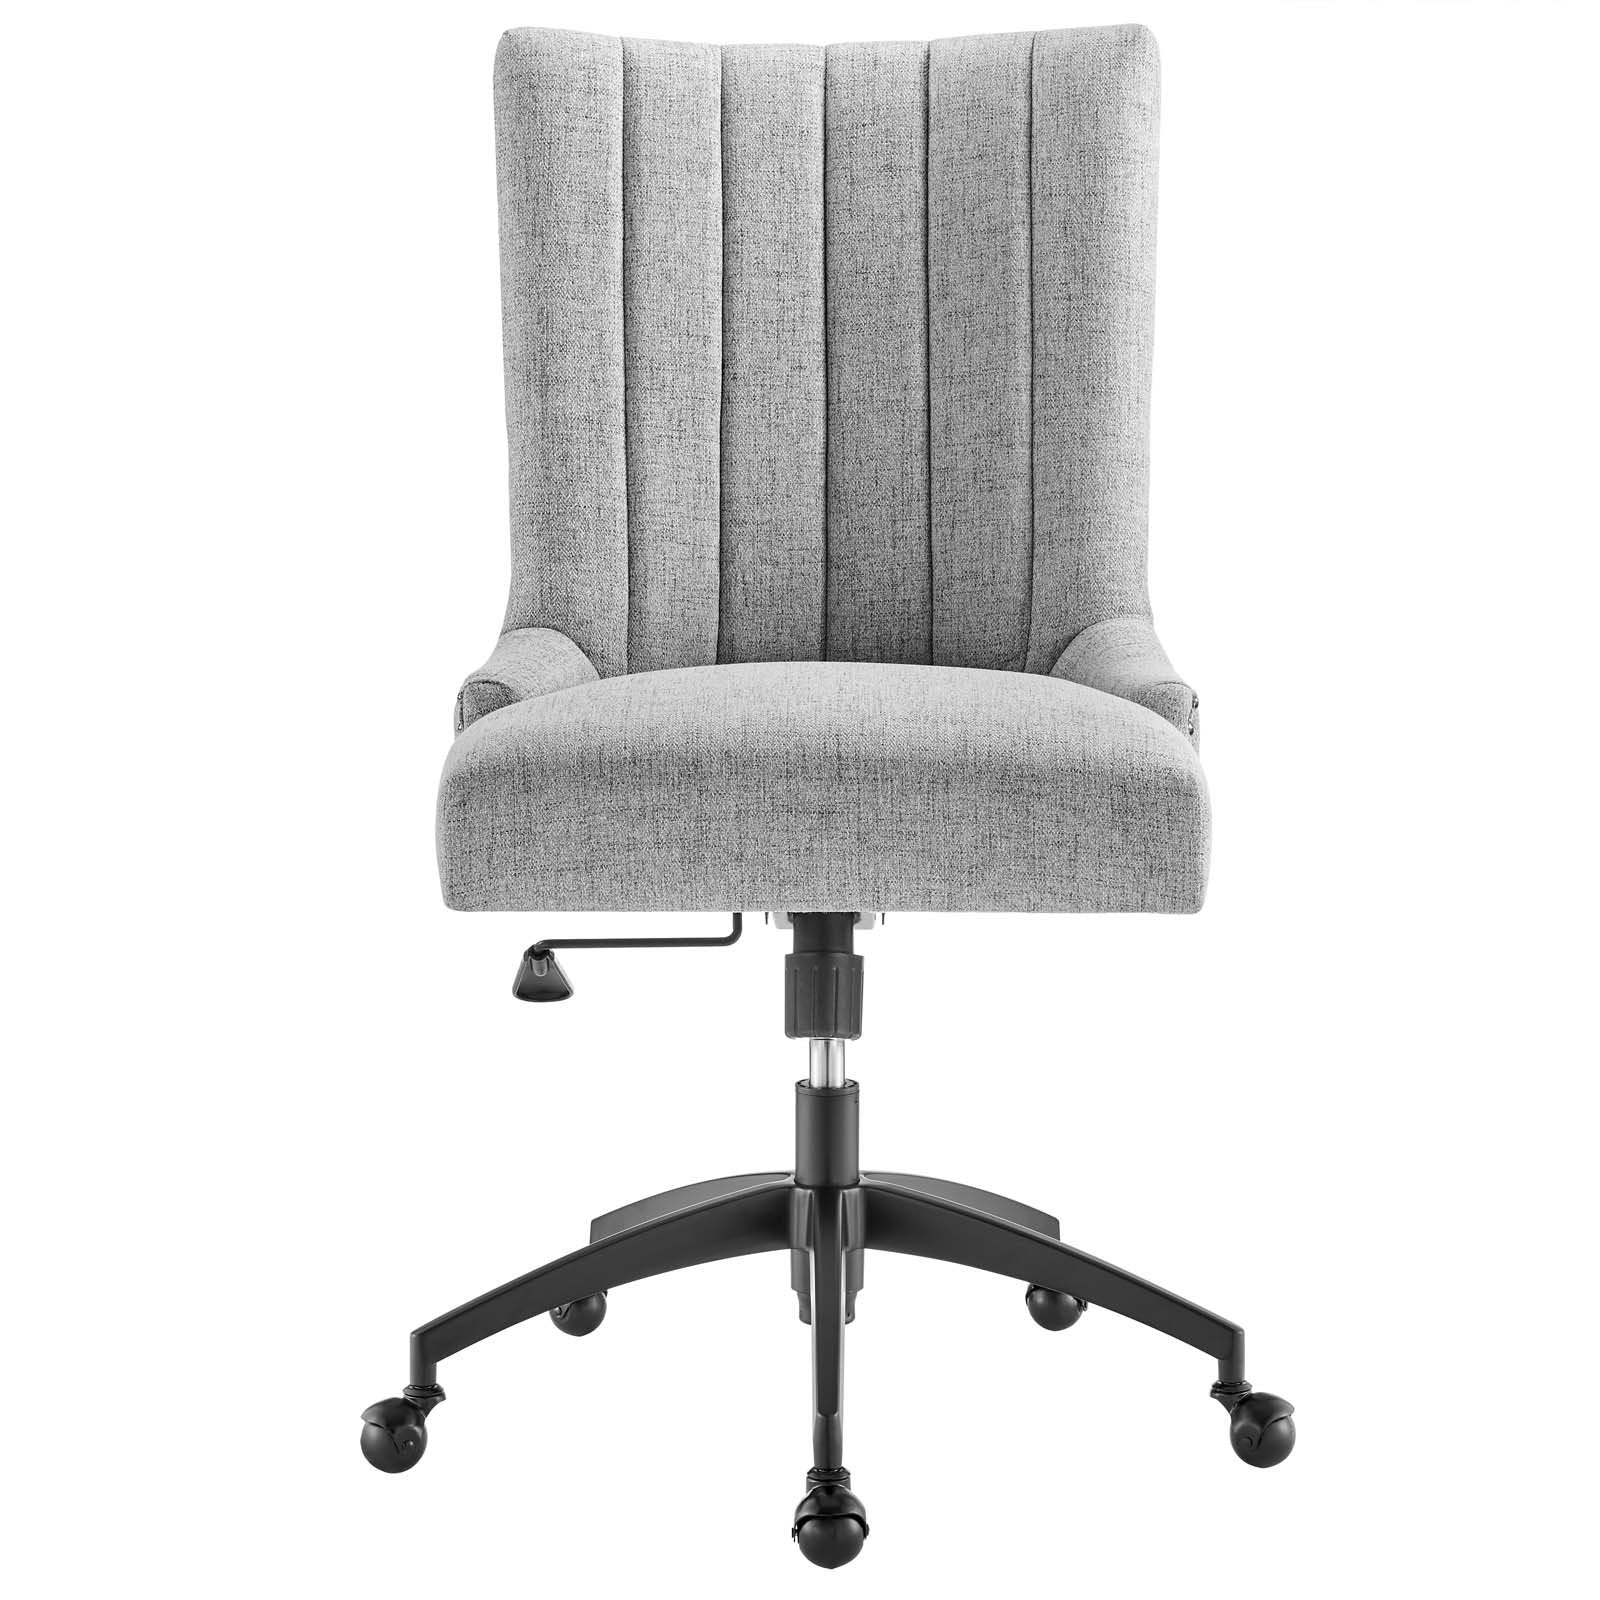 Empower Channel Tufted Fabric Office Chair - East Shore Modern Home Furnishings